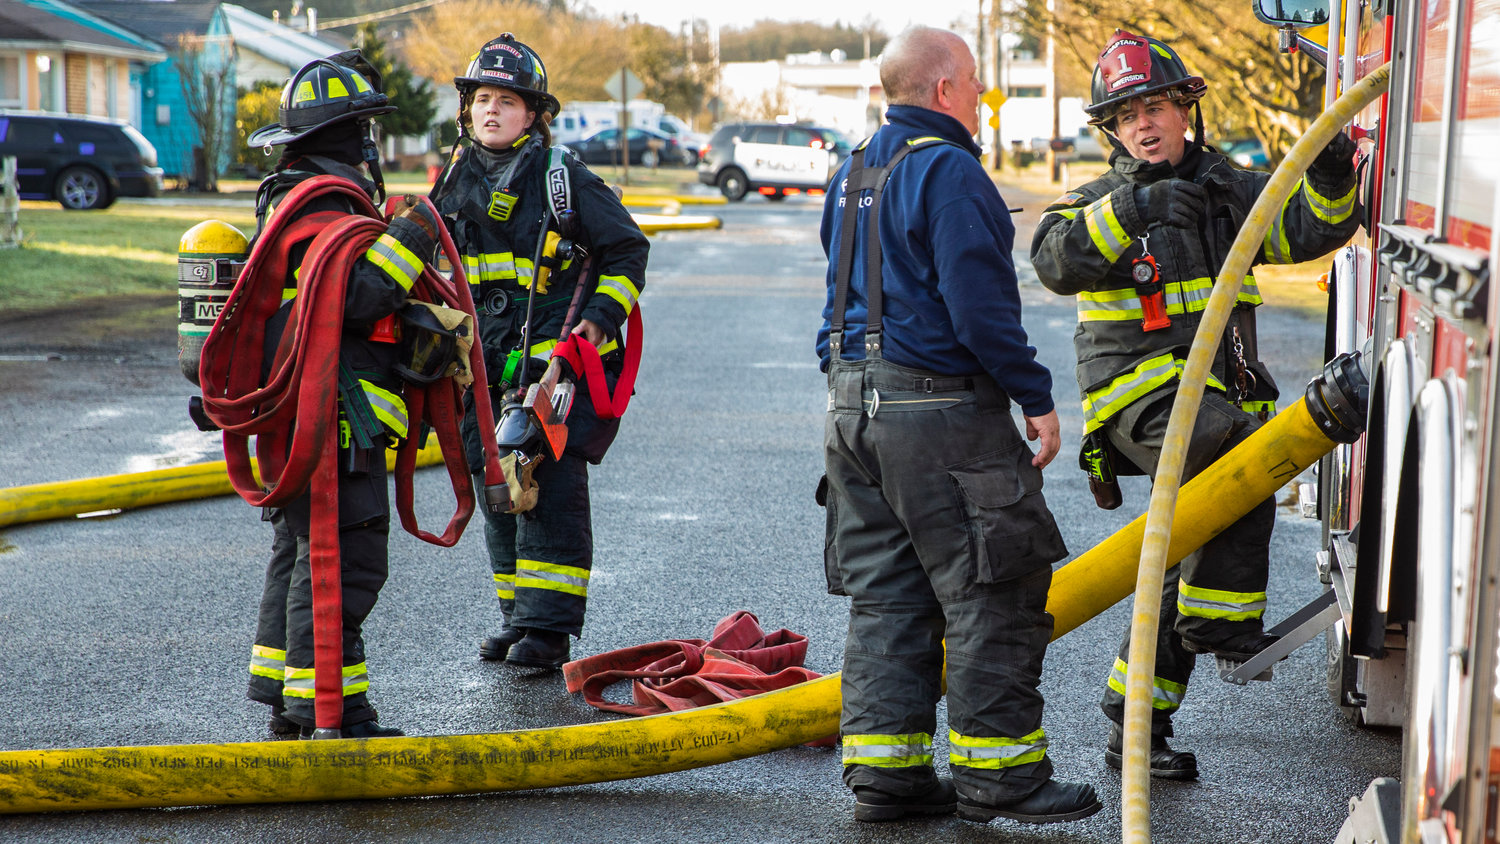 Crews from Riverside Fire Authority carry hoses along View Avenue in Centralia where a detached garage and items inside were damaged by flames Wednesday morning.